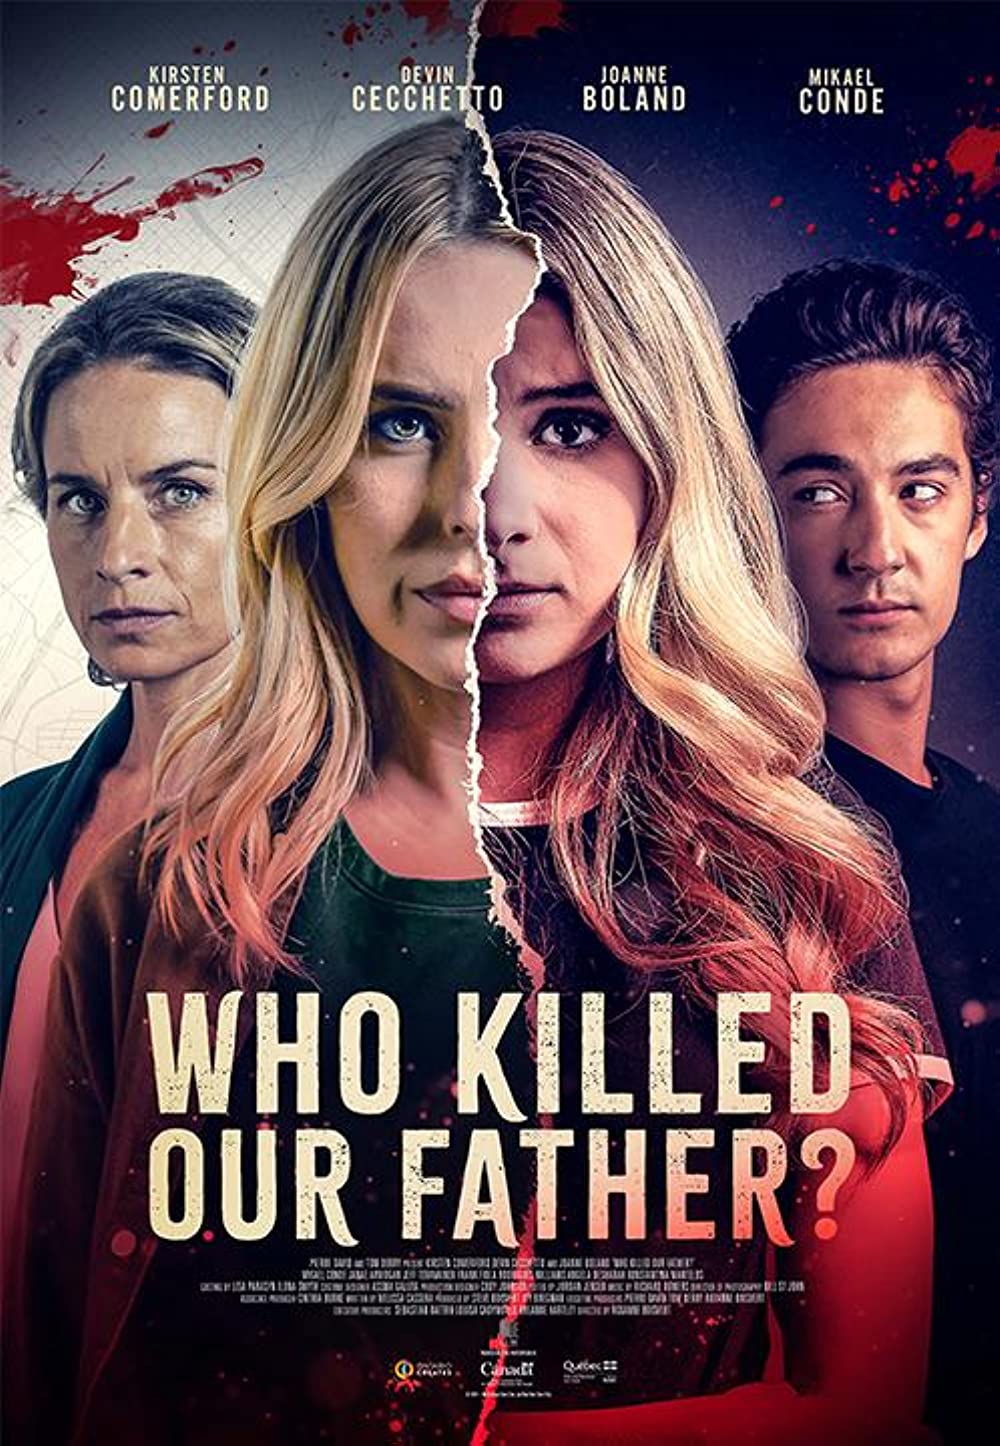 Who.Killed.Our.Father.2023 Telugu Dub [Voice Over] 1080p 720p 480p WEB-DL Online Stream 1XBET